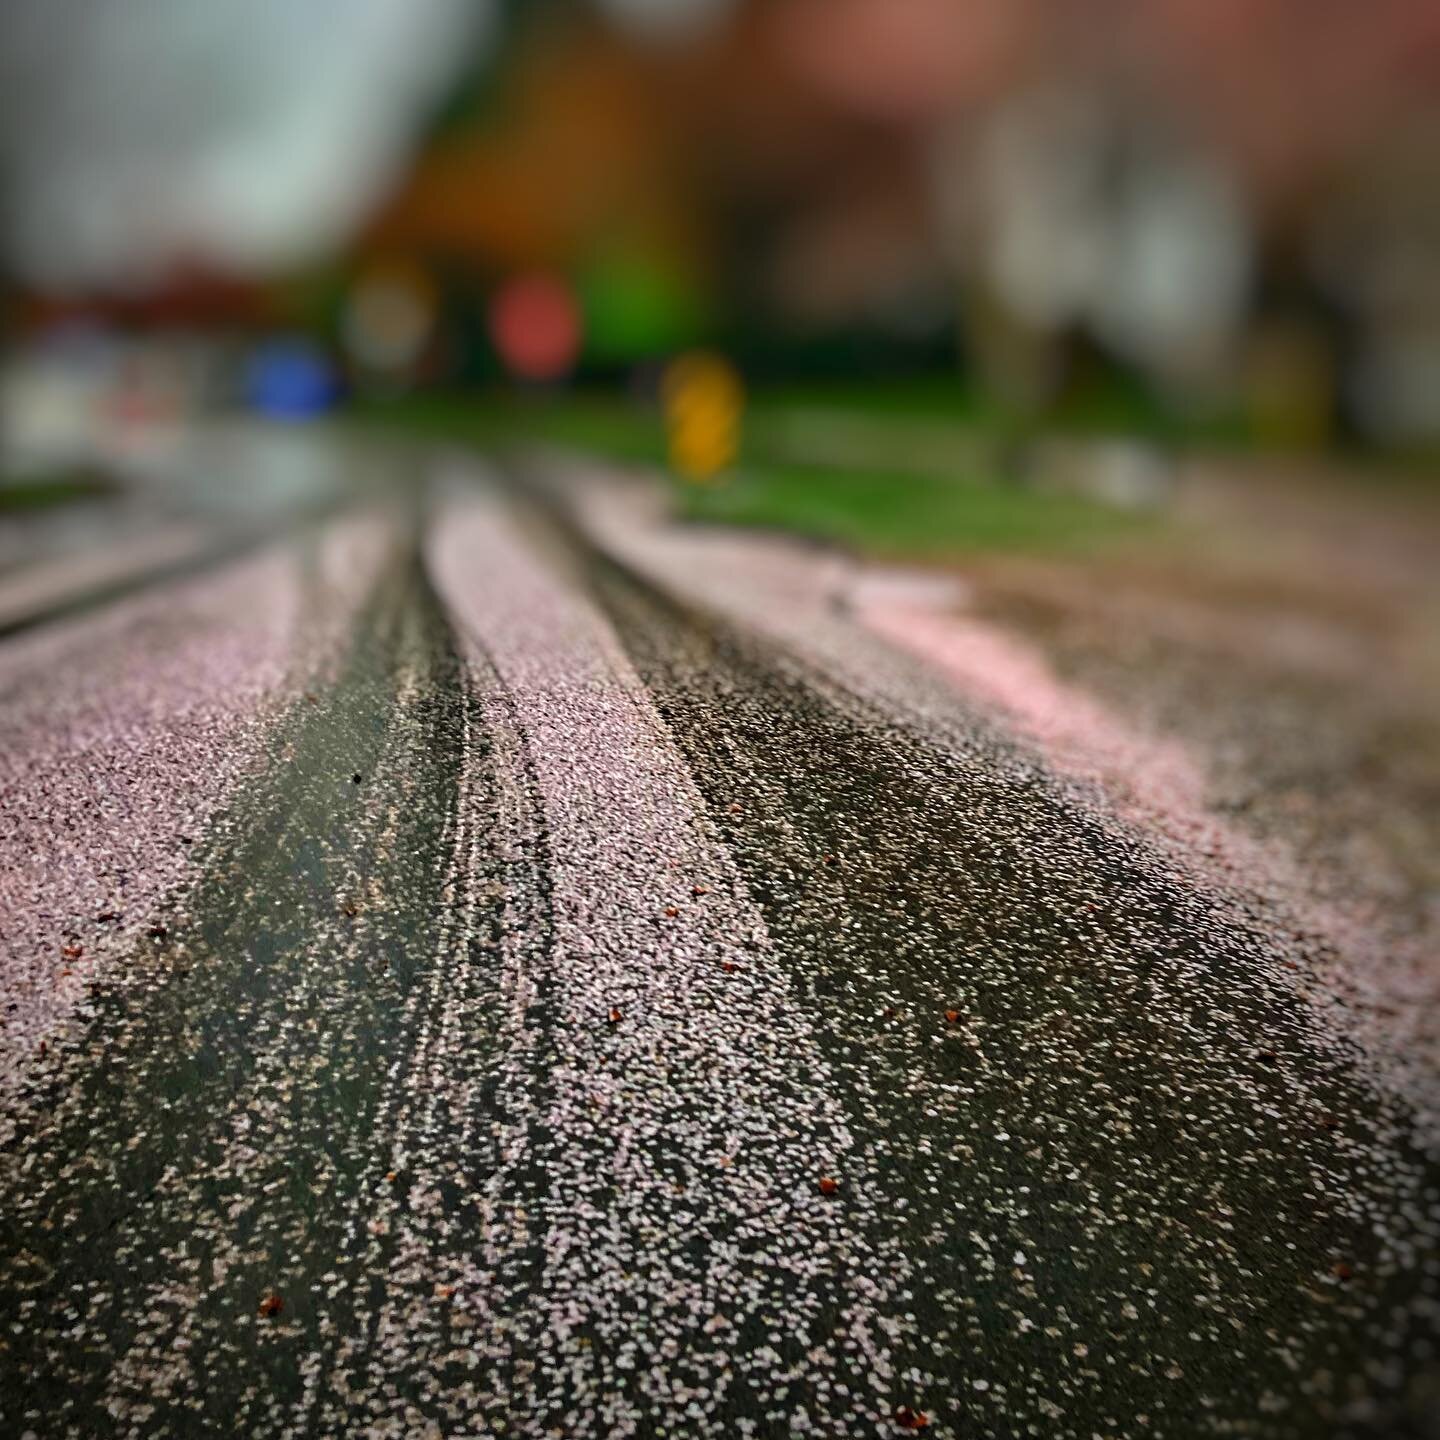 Experimenting with different angles and depths #spring #cherryblossom #cherryblossomtracks #niknazk